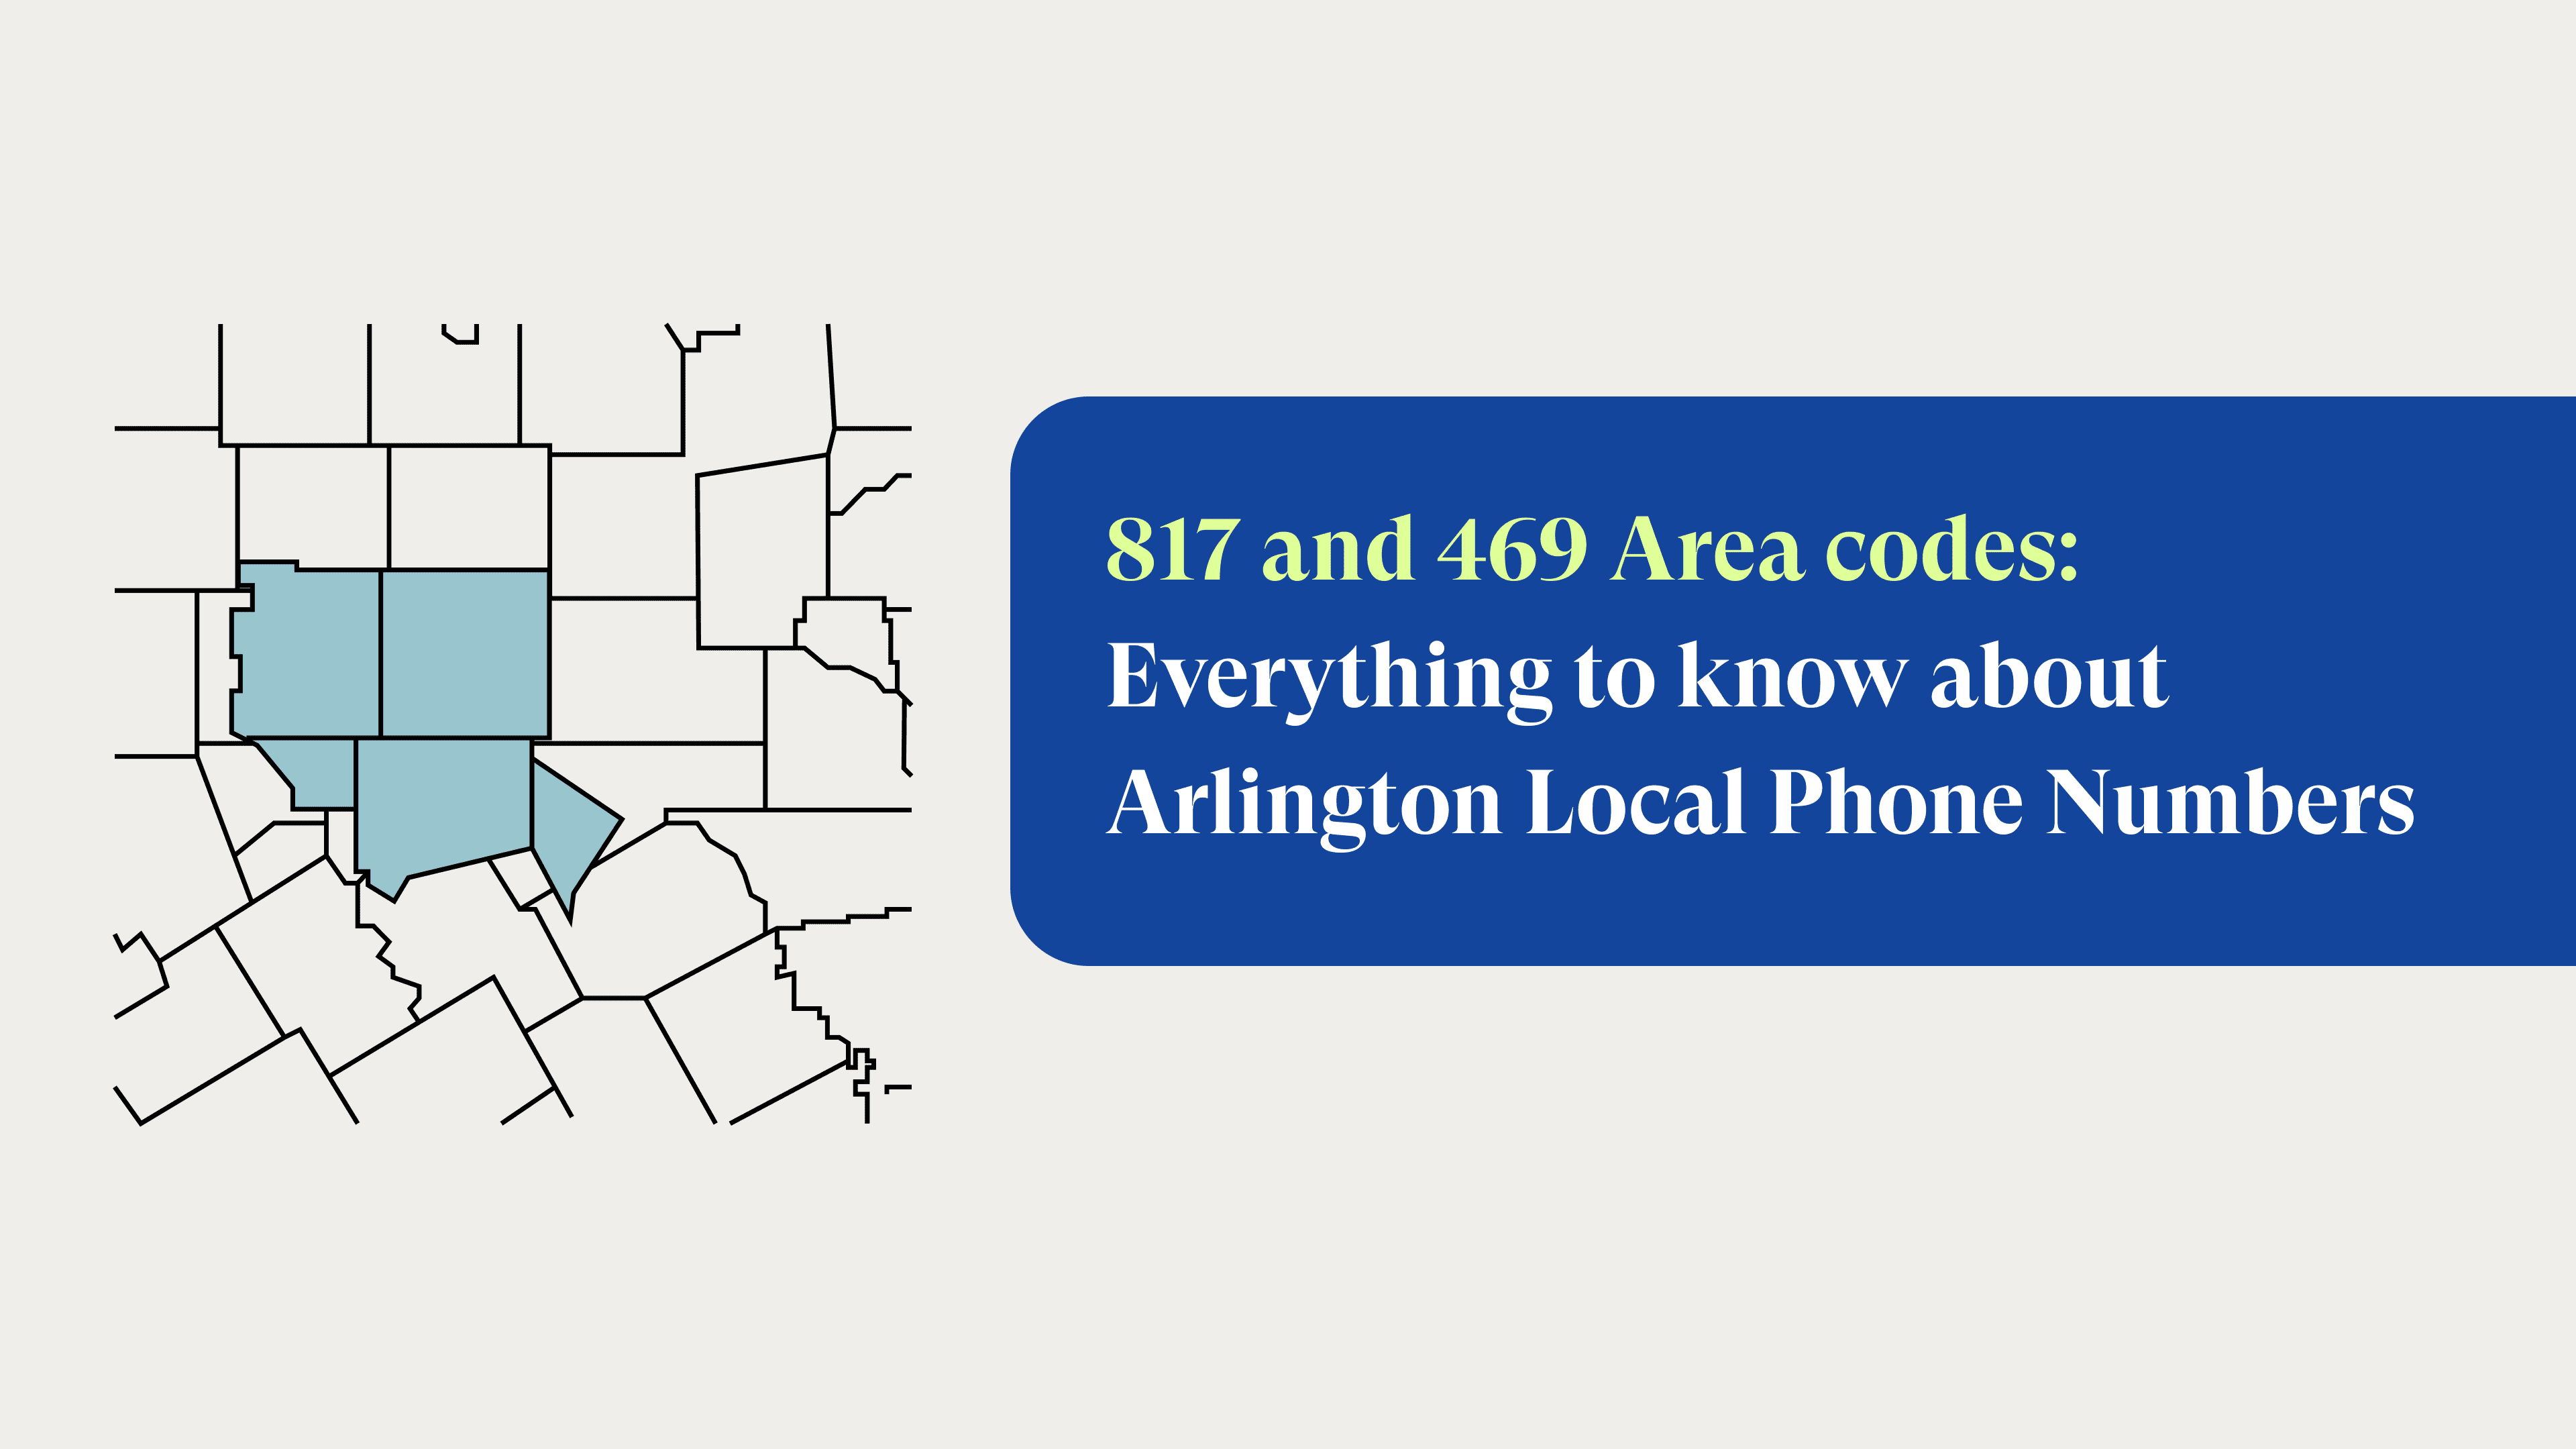 817 and 469 Area codes: Everything to know about Arlington Local Phone Numbers